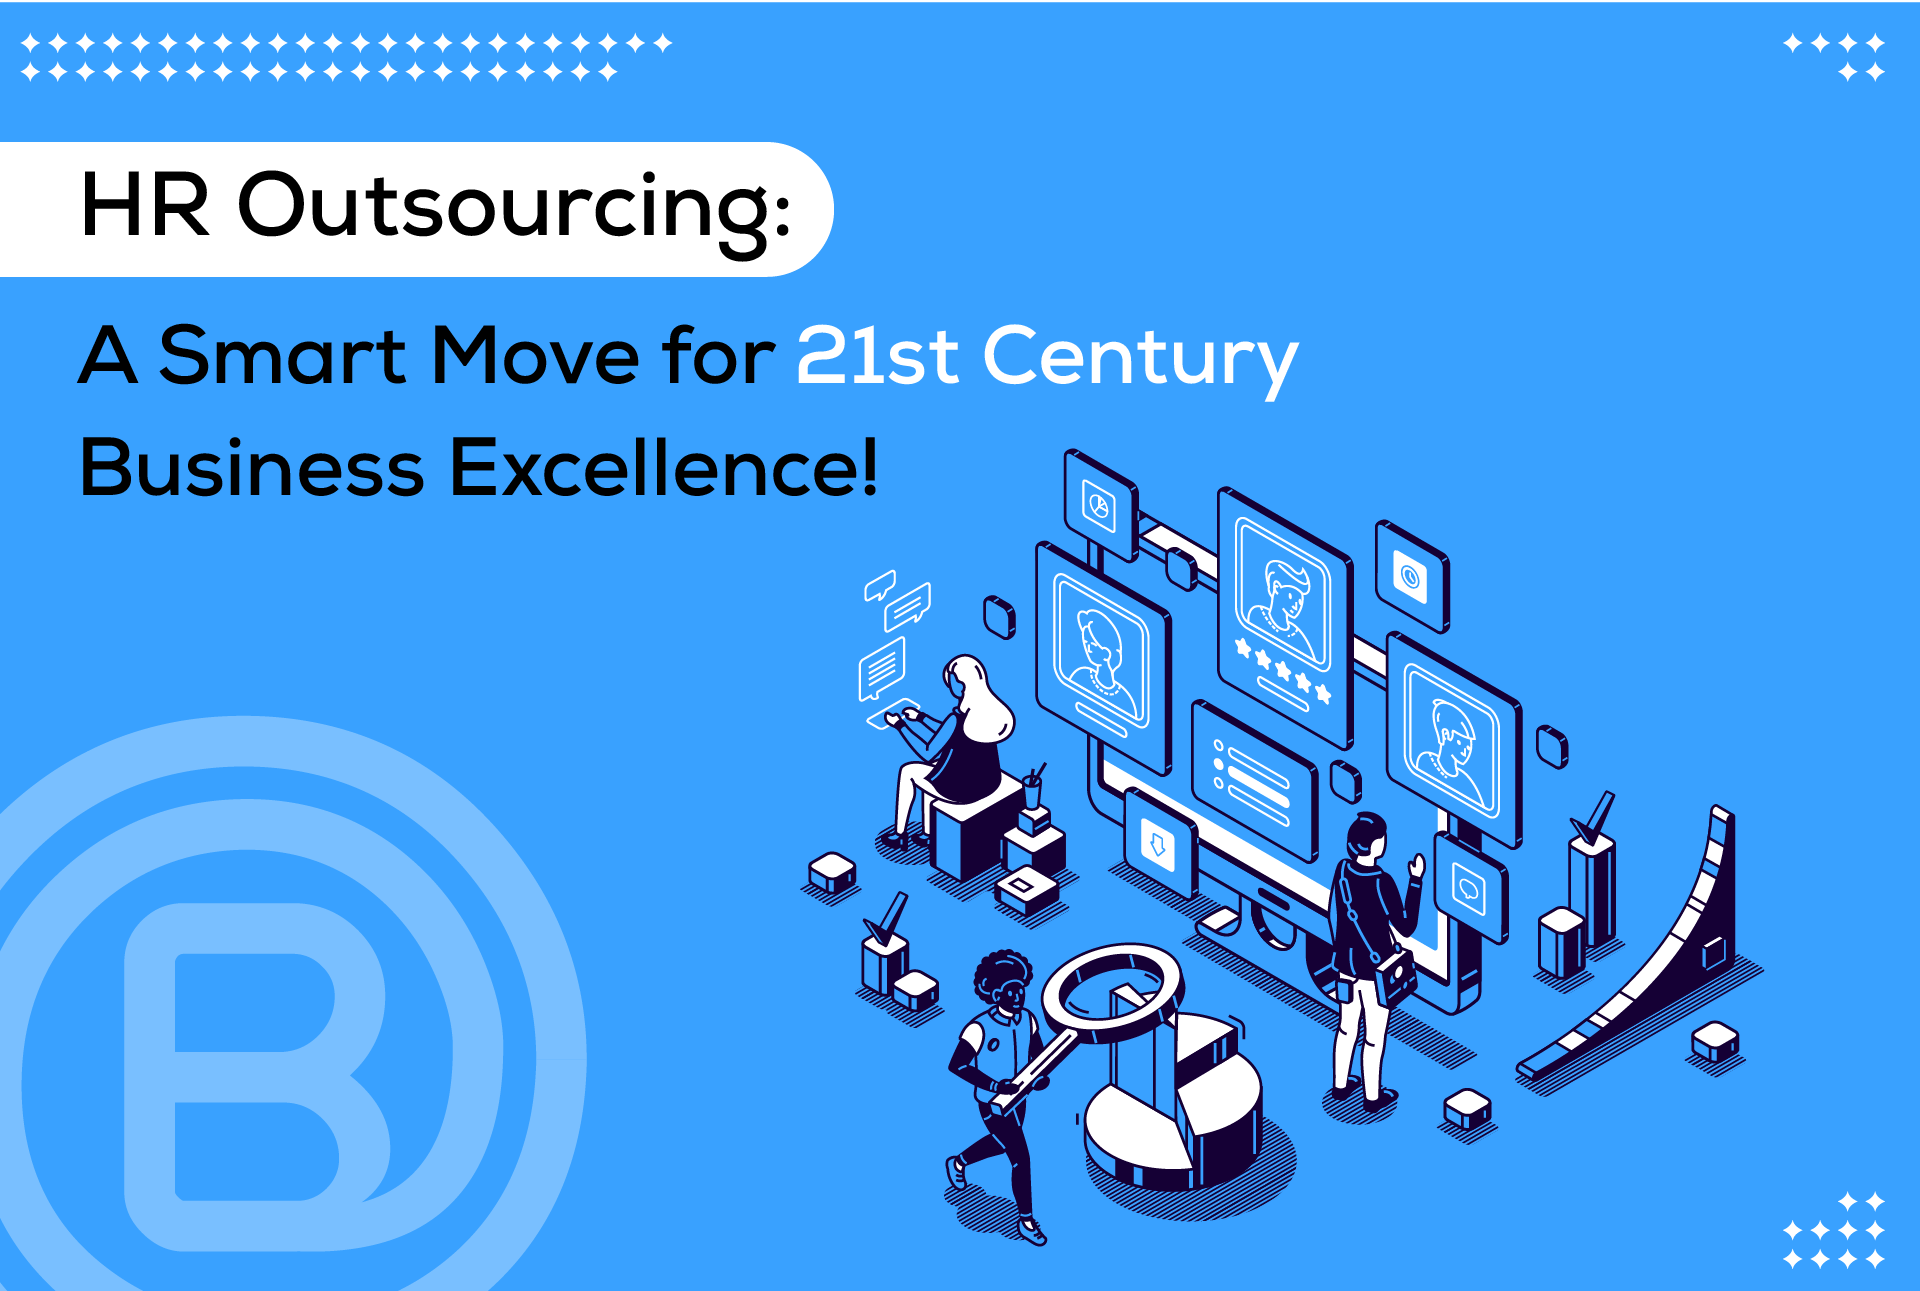 HR Outsourcing: A Smart Move for 21st Century Business Excellence